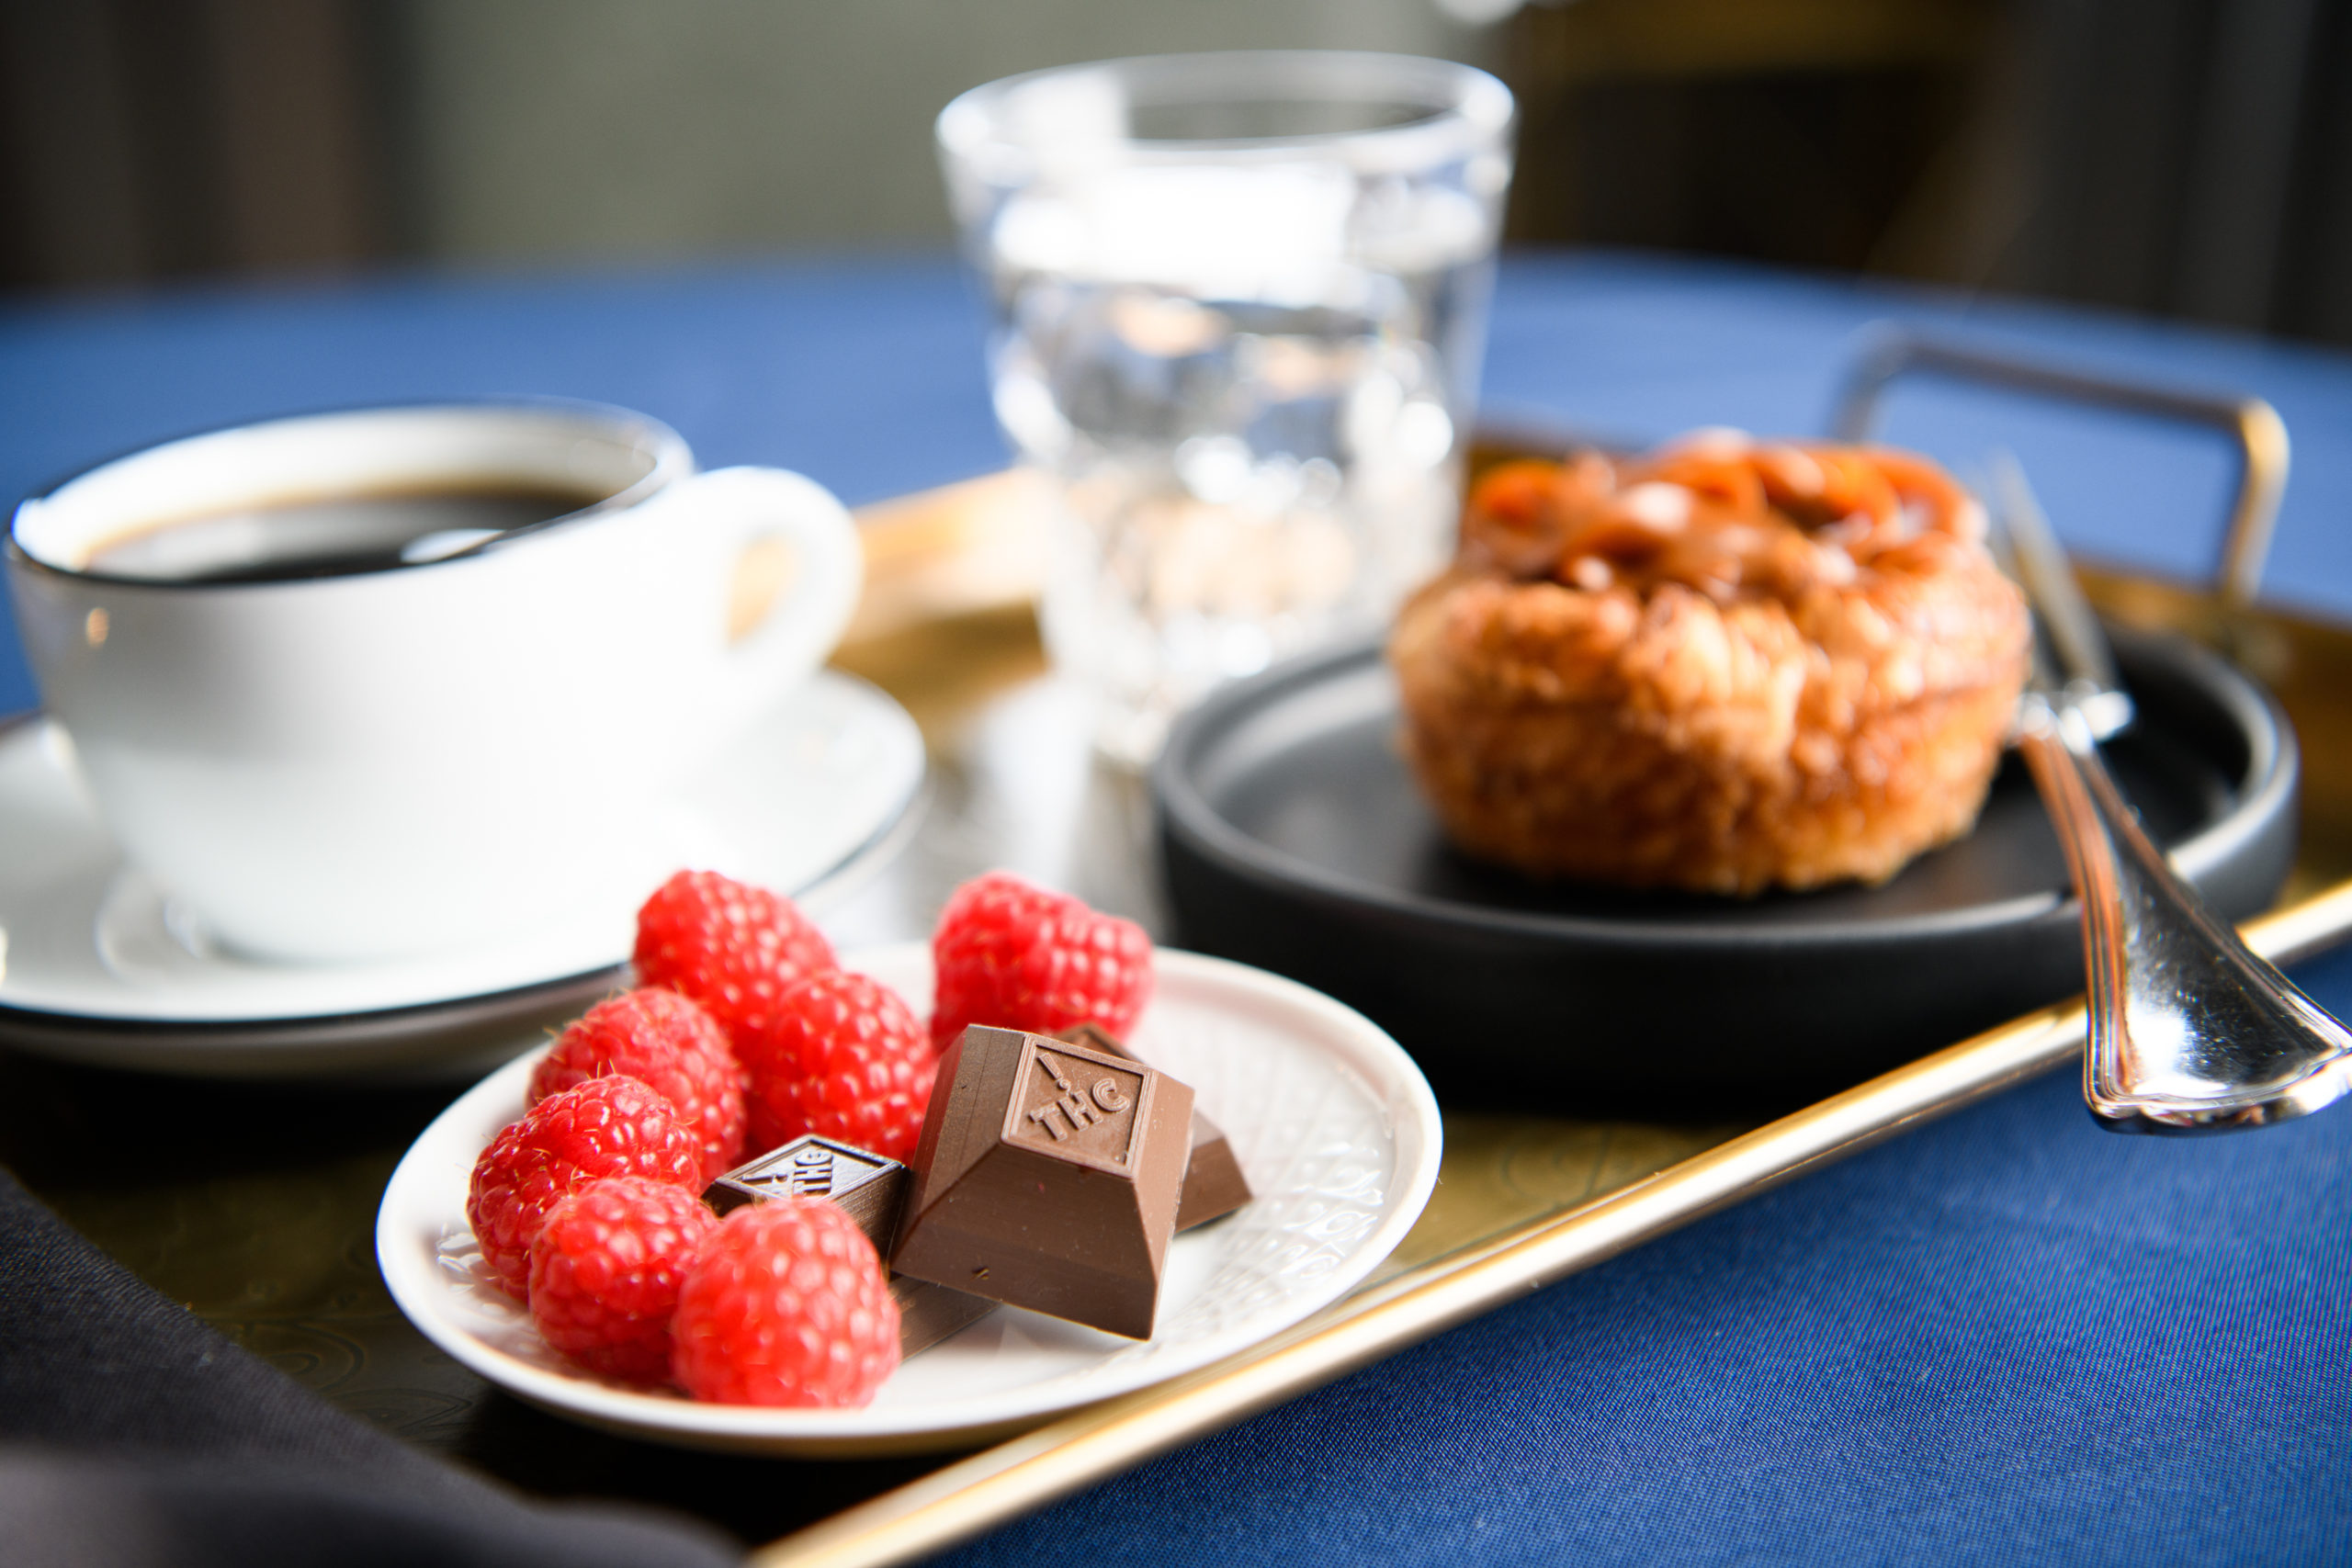 Nove cannabis-infused luxury chocolates resting on a small plate with raspberries; the plate rests on a breakfast tray. Discover your edible ritual.